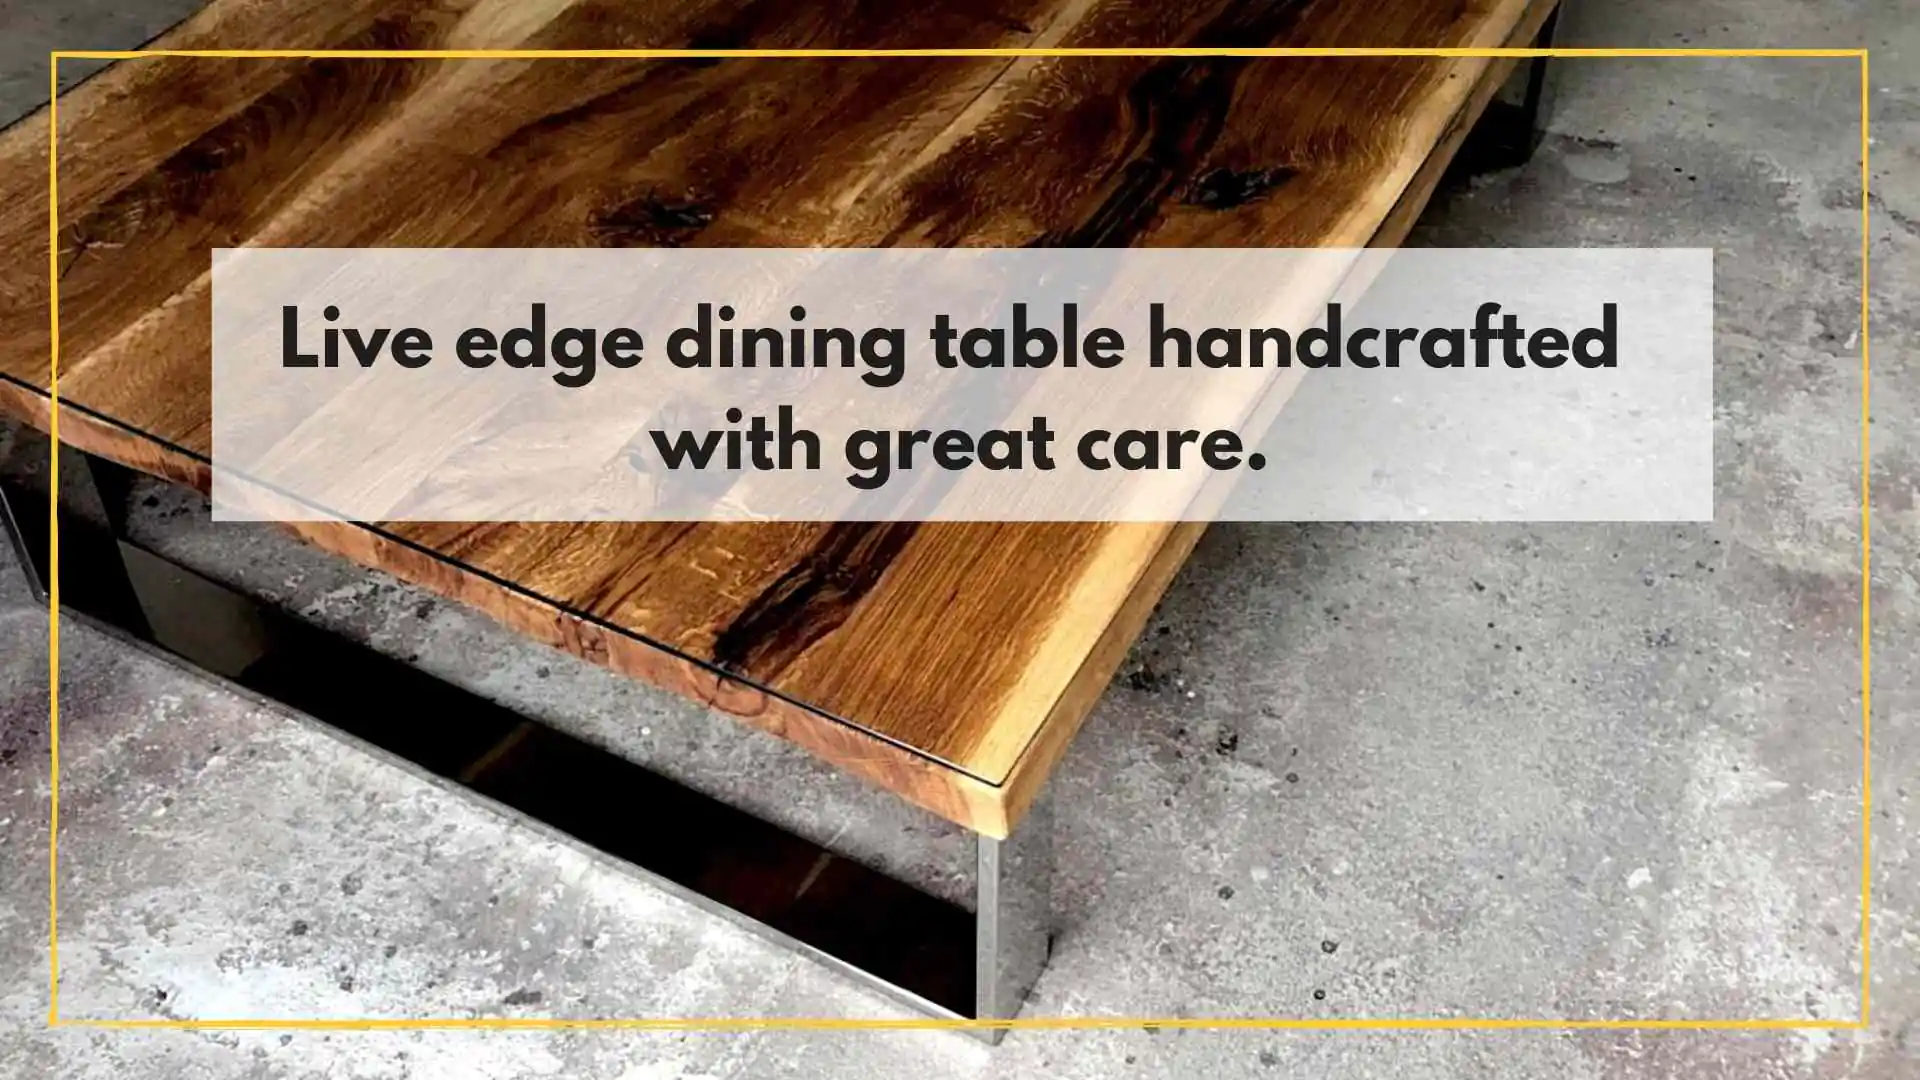 Live edge oak dining table handcrafted with great care